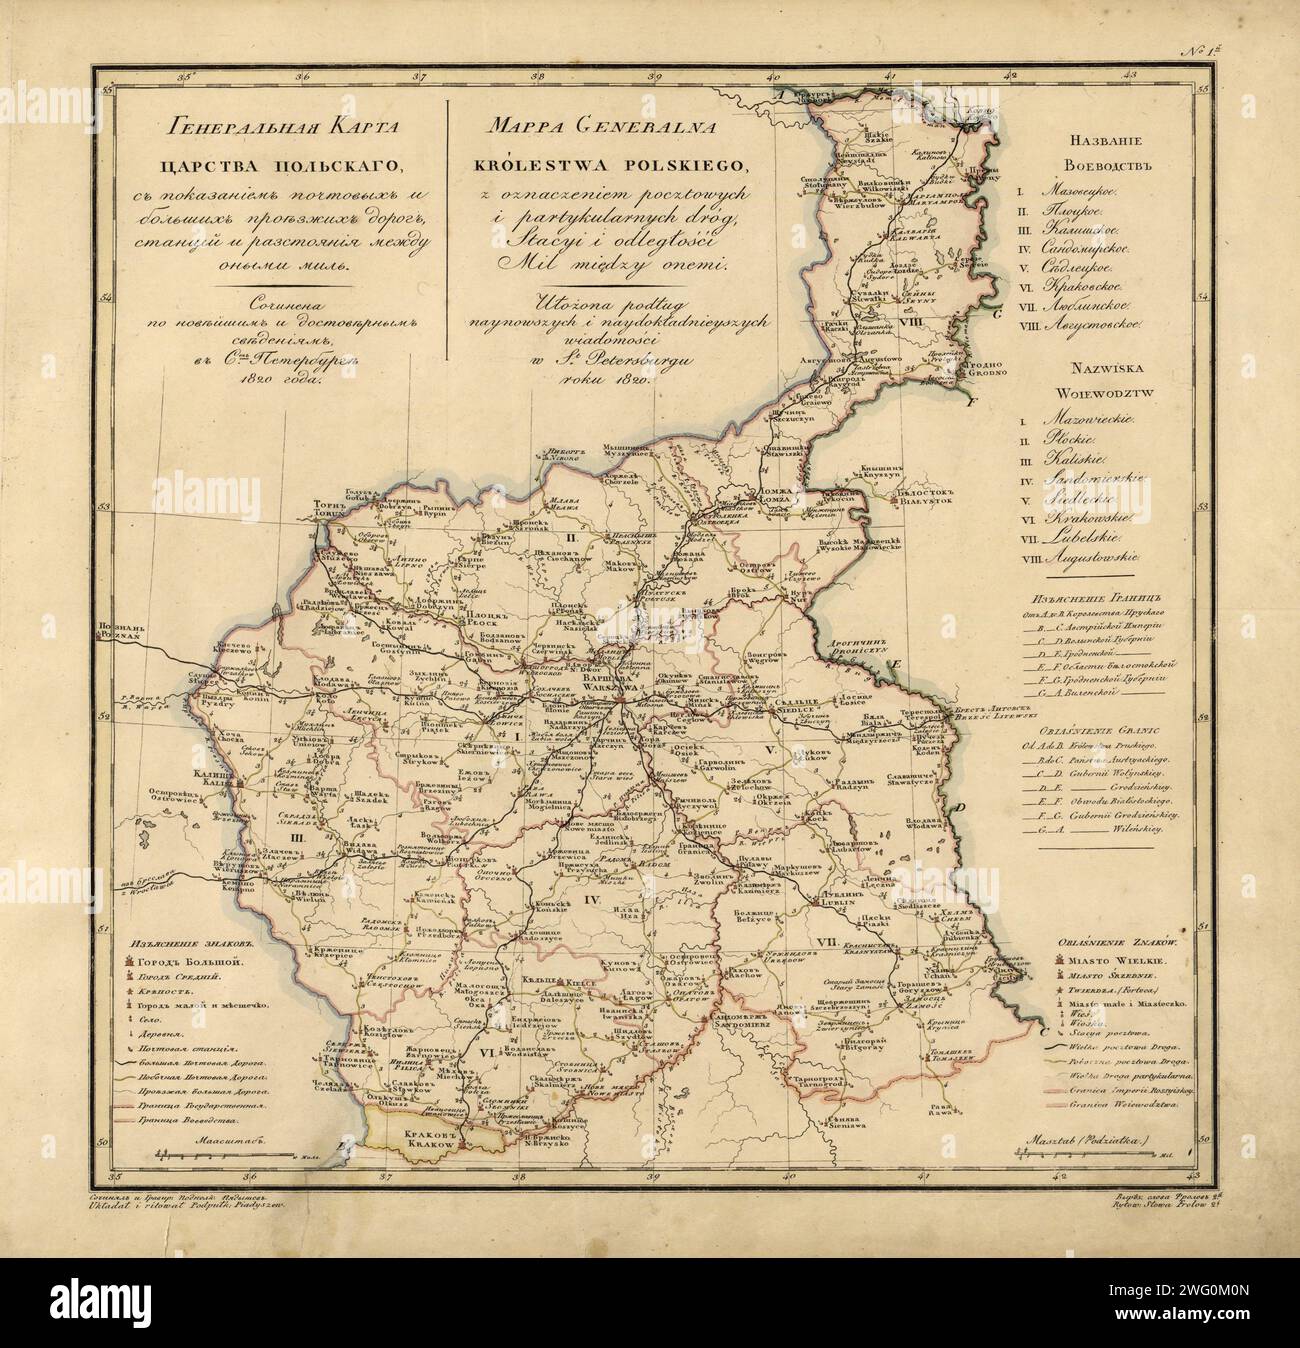 General Map of the Polish Empire: Showing Postal and Major Roads, Stations and the Distance in Miles Between Them, 1820. This 1820 map of the Polish Empire, then part of the Russian Empire, is from a larger work,Geograficheskii atlas Rossiiskoi imperii, tsarstva Pol'skogo i velikogo kniazhestva Finliandskogo (Geographical atlas of the Russian Empire, the Kingdom of Poland, and the Grand Duchy of Finland), containing 60 maps of the Russian Empire. Compiled and engraved by Colonel V.P. Piadyshev, it reflects the detailed mapping carried out by Russian military cartographers in the first quarter Stock Photo